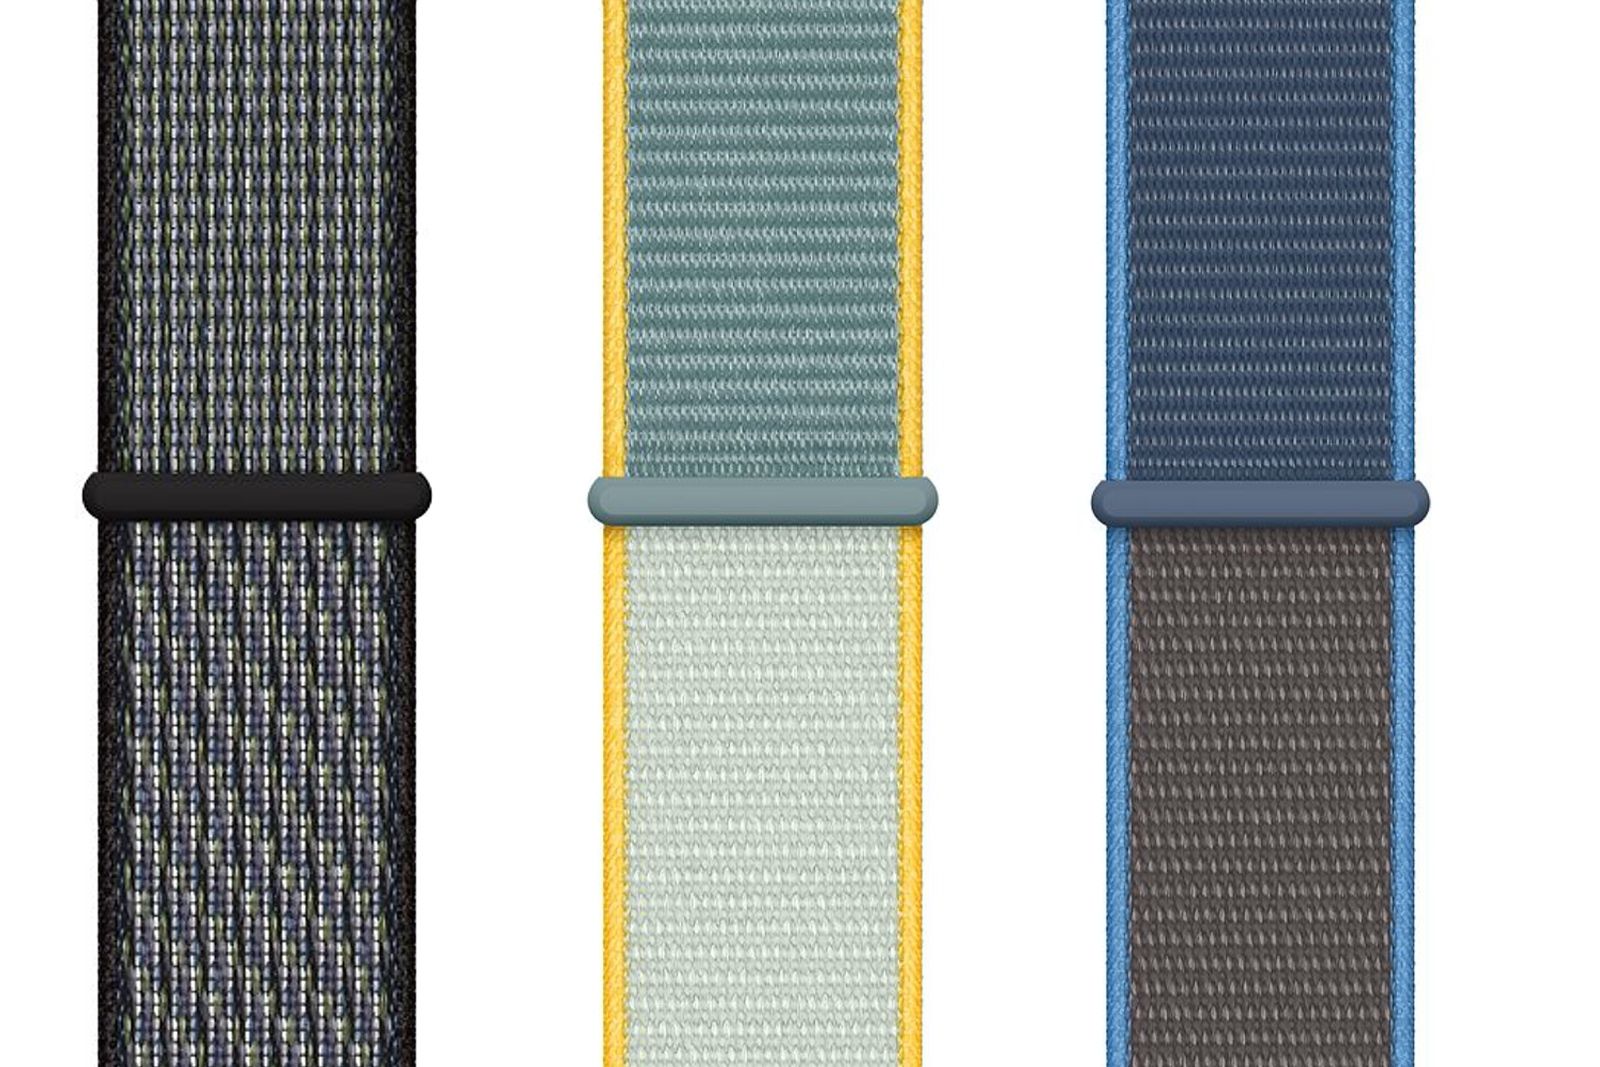 Apple Shows Off Brand New Apple Watch Straps And Iphone 11 Cases image 2